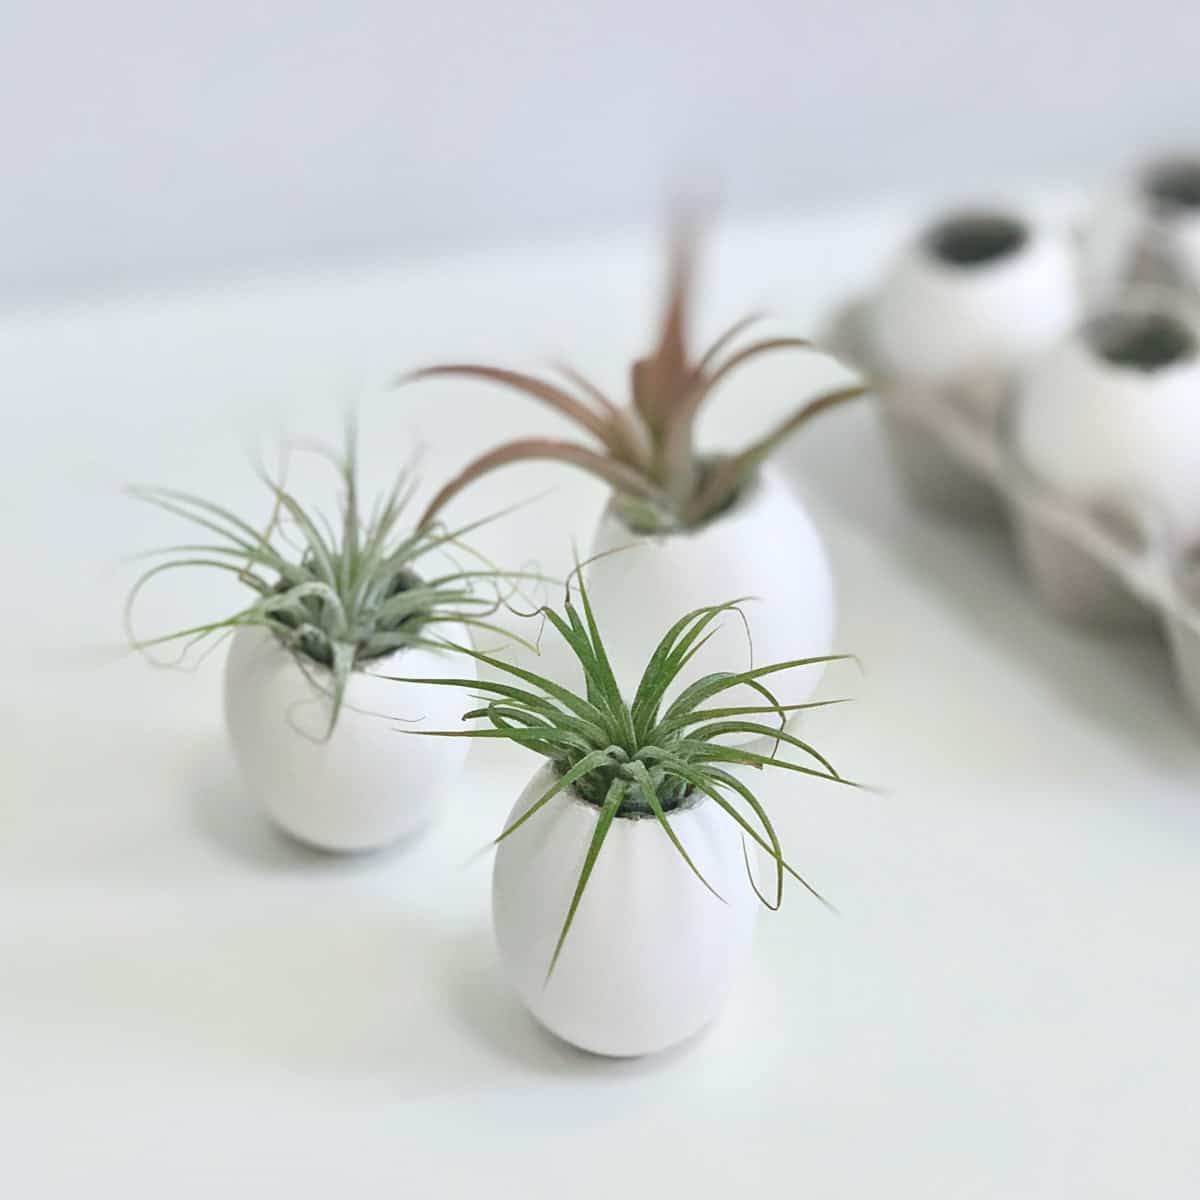 air plants in eggshell planters with carton